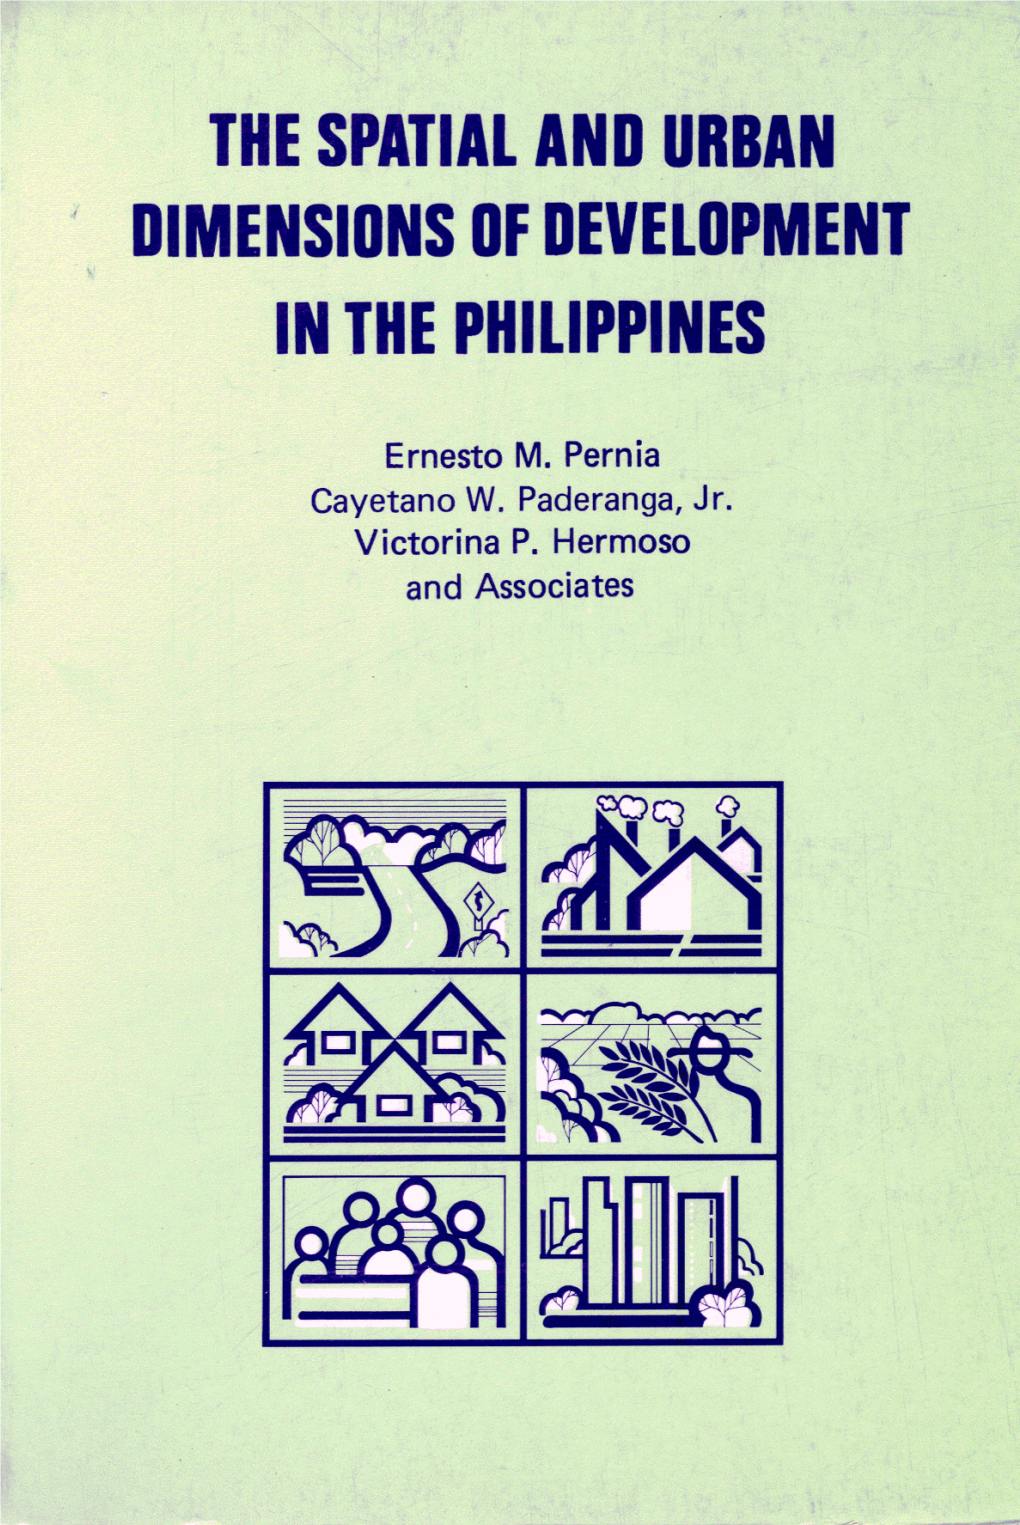 The Spatial and Urban Dimensions of Development in the Philippines